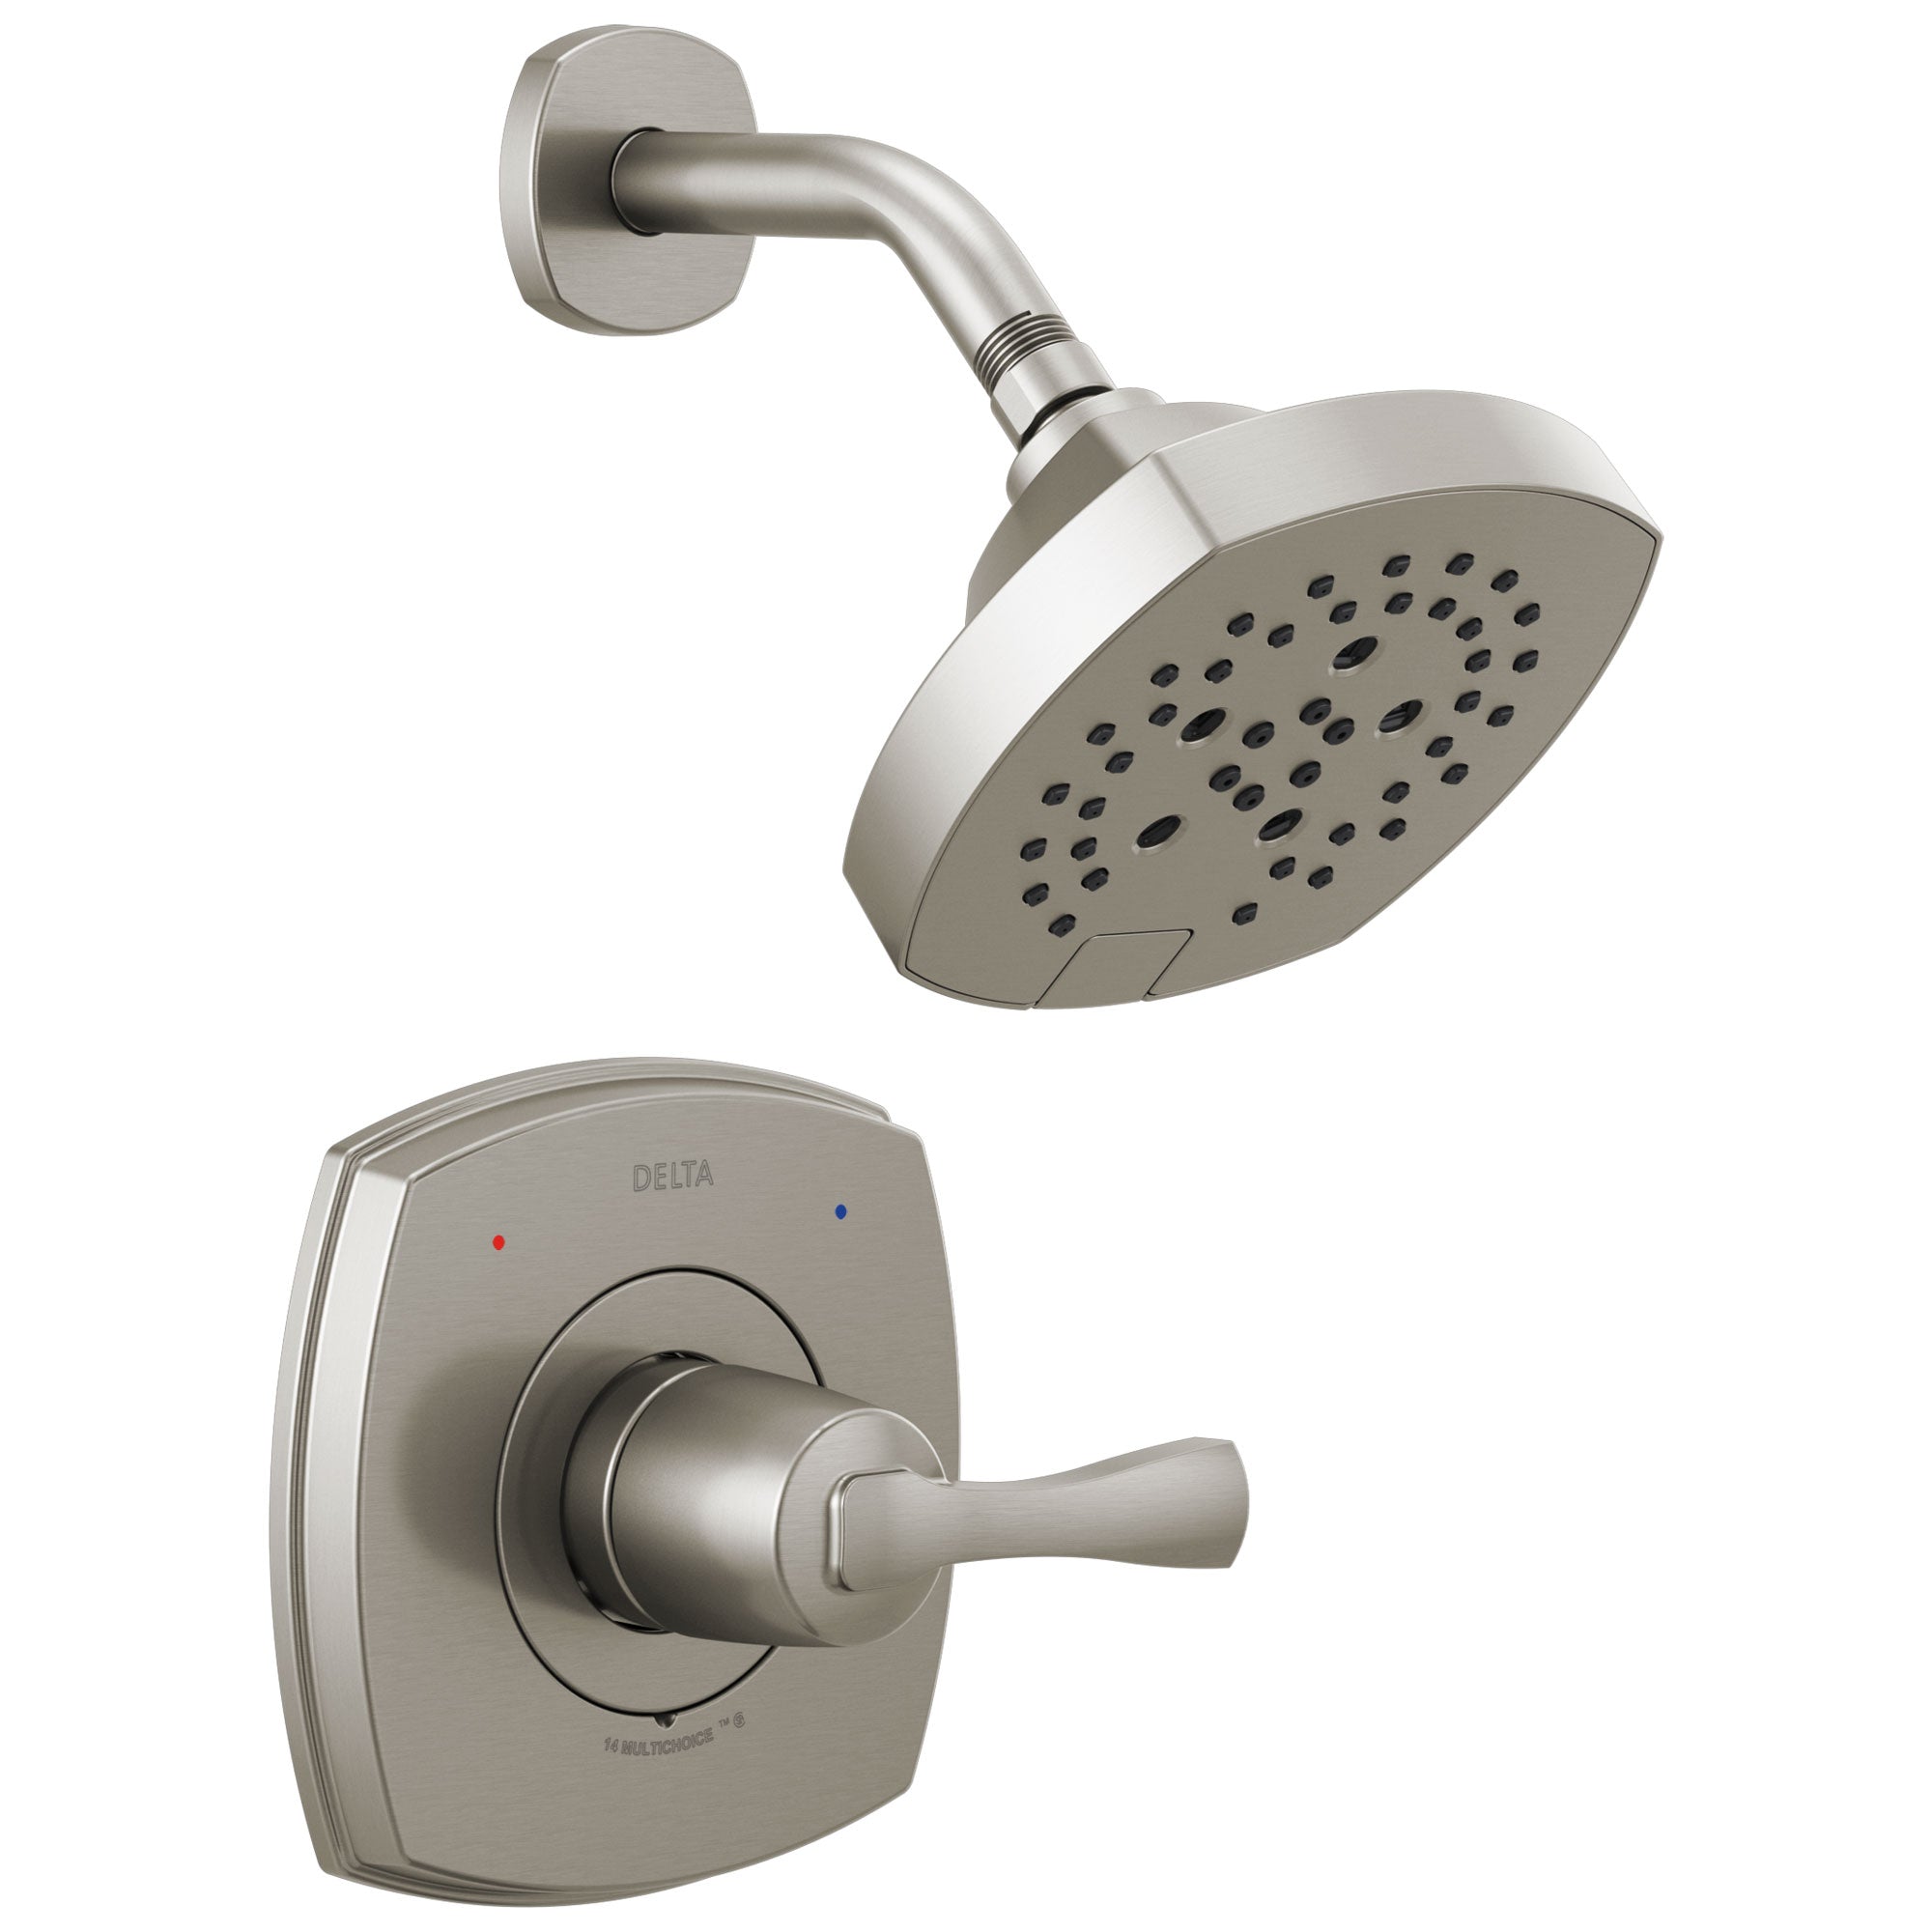 Delta Stryke Stainless Steel Finish 14 Series Shower Only Faucet Includes Single Lever Handle, Cartridge, and Rough-in Valve without Stops D3485V